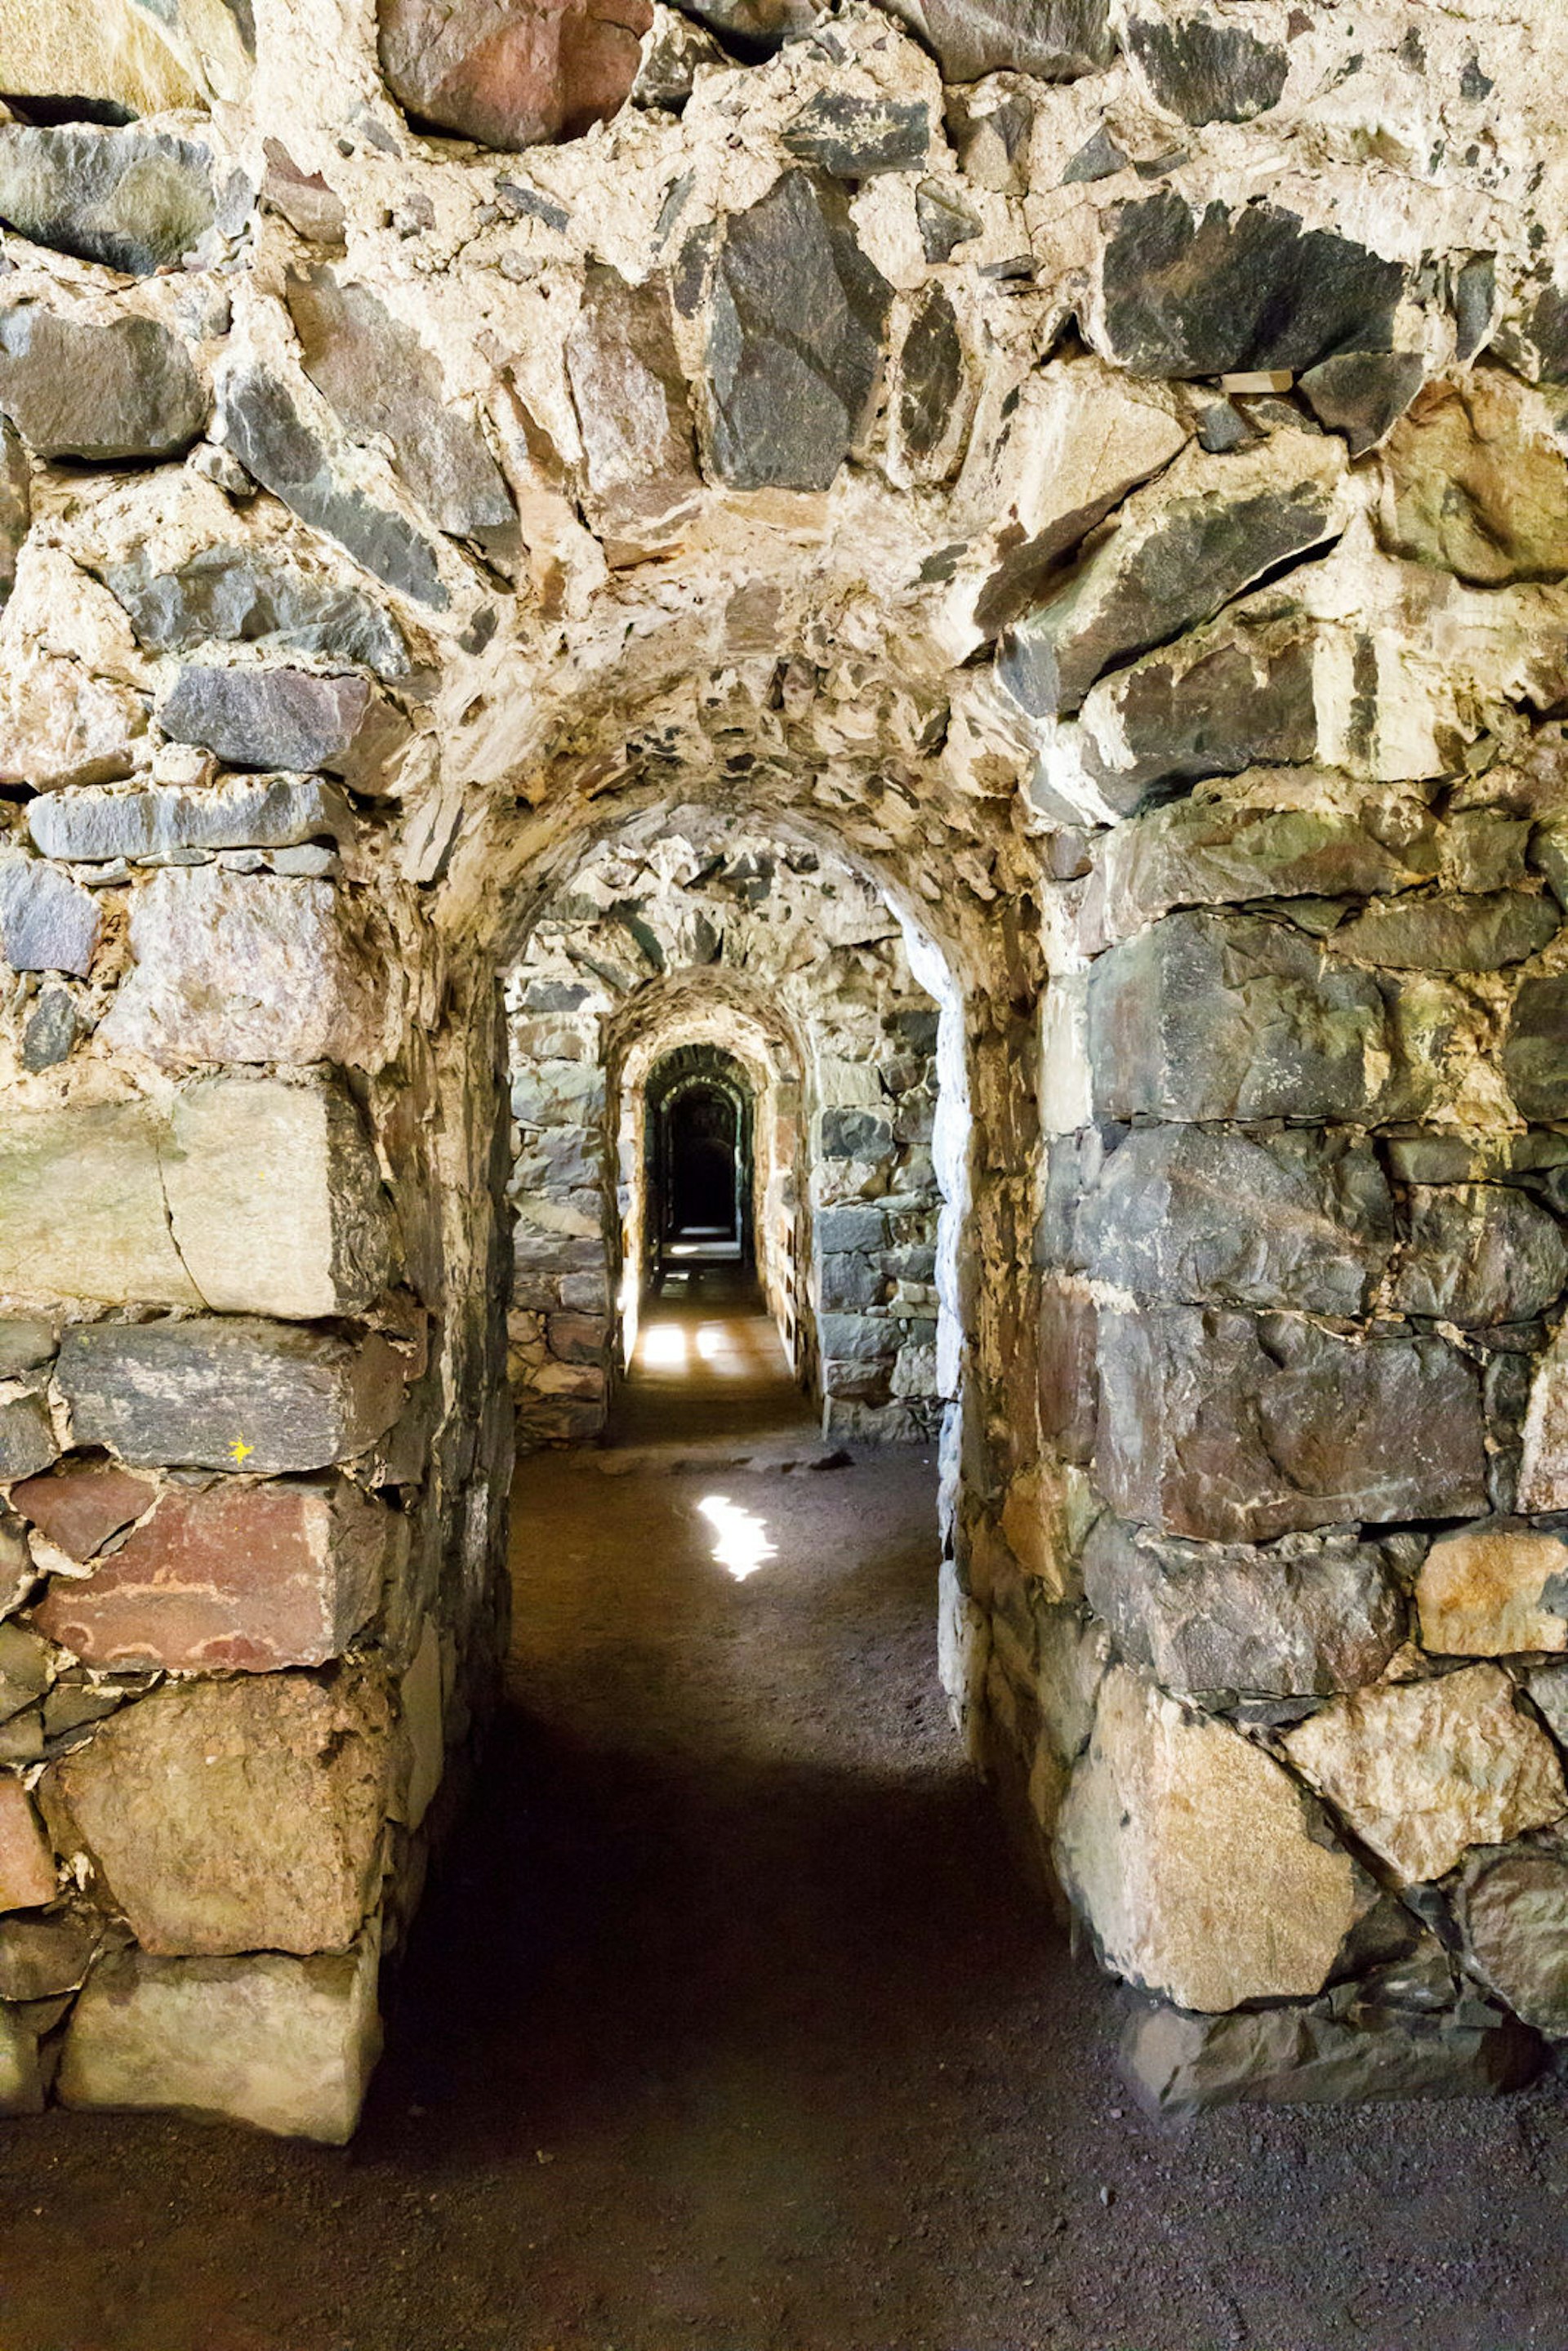 View through a series of stone archways inside Suomenlinna's fortress walls, Helsinki